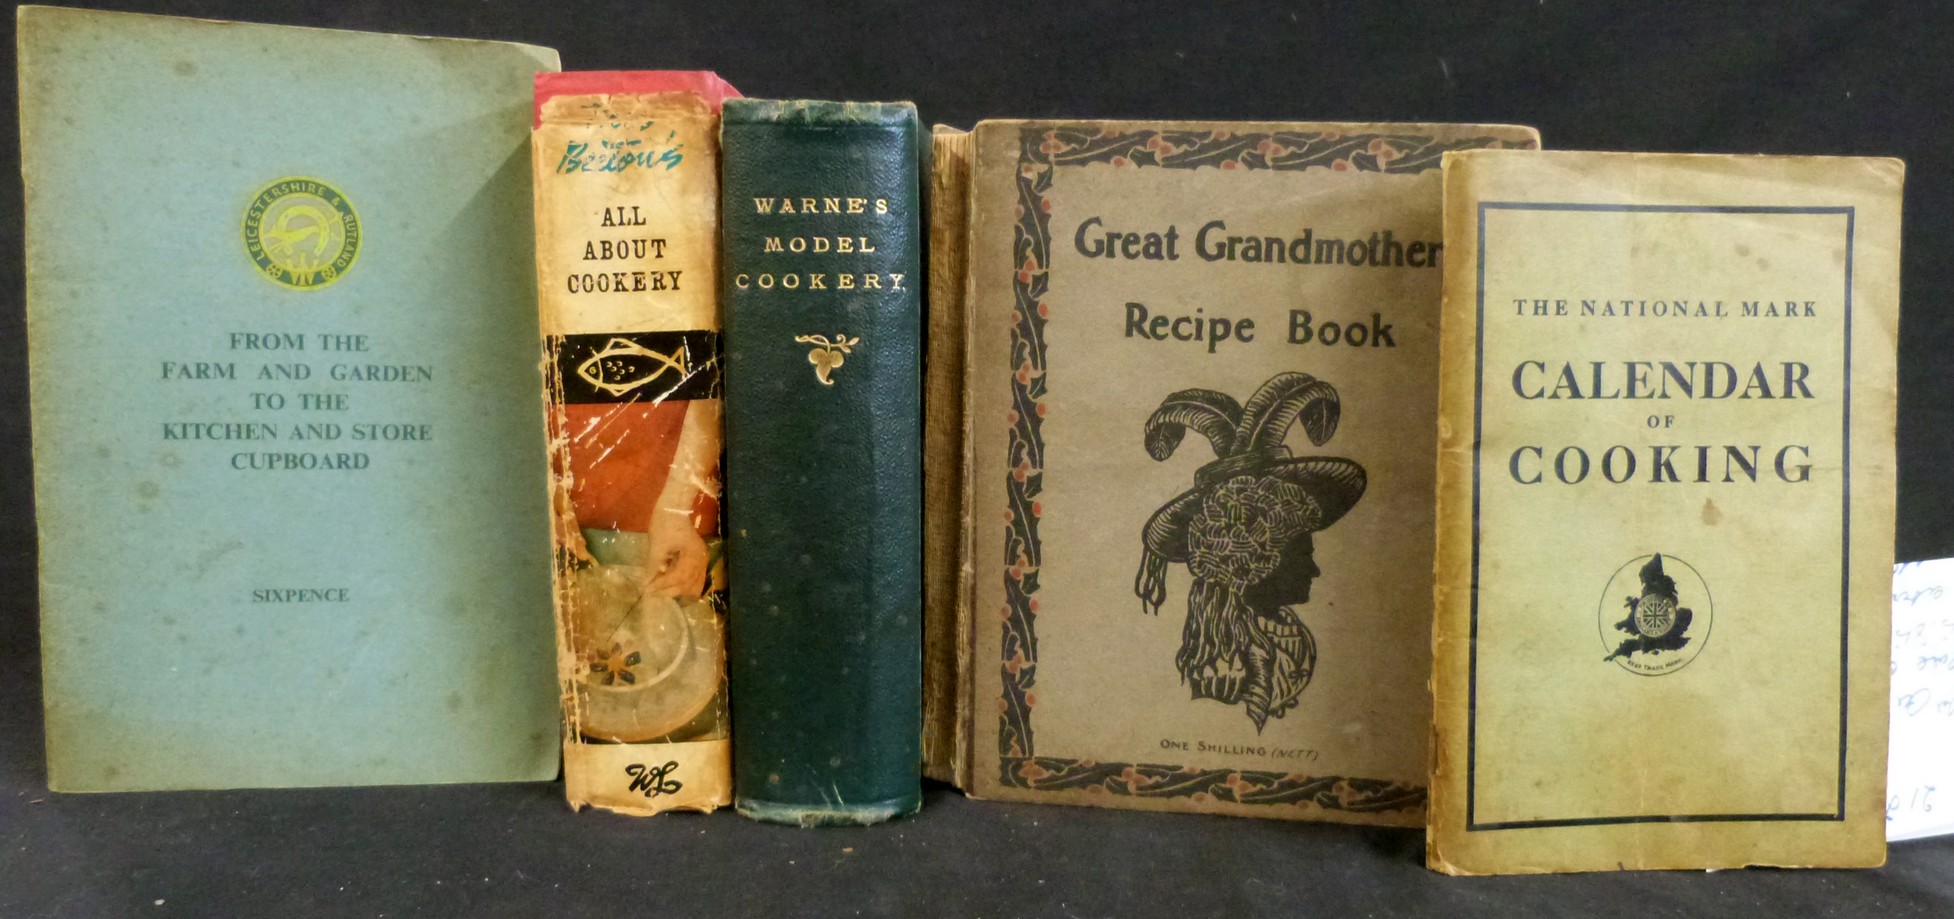 MARY JEWRY (ED): WARNE'S MODEL COOKERY AND HOUSEKEEPING BOOK, London, Frederick Warne, 1868, 1st